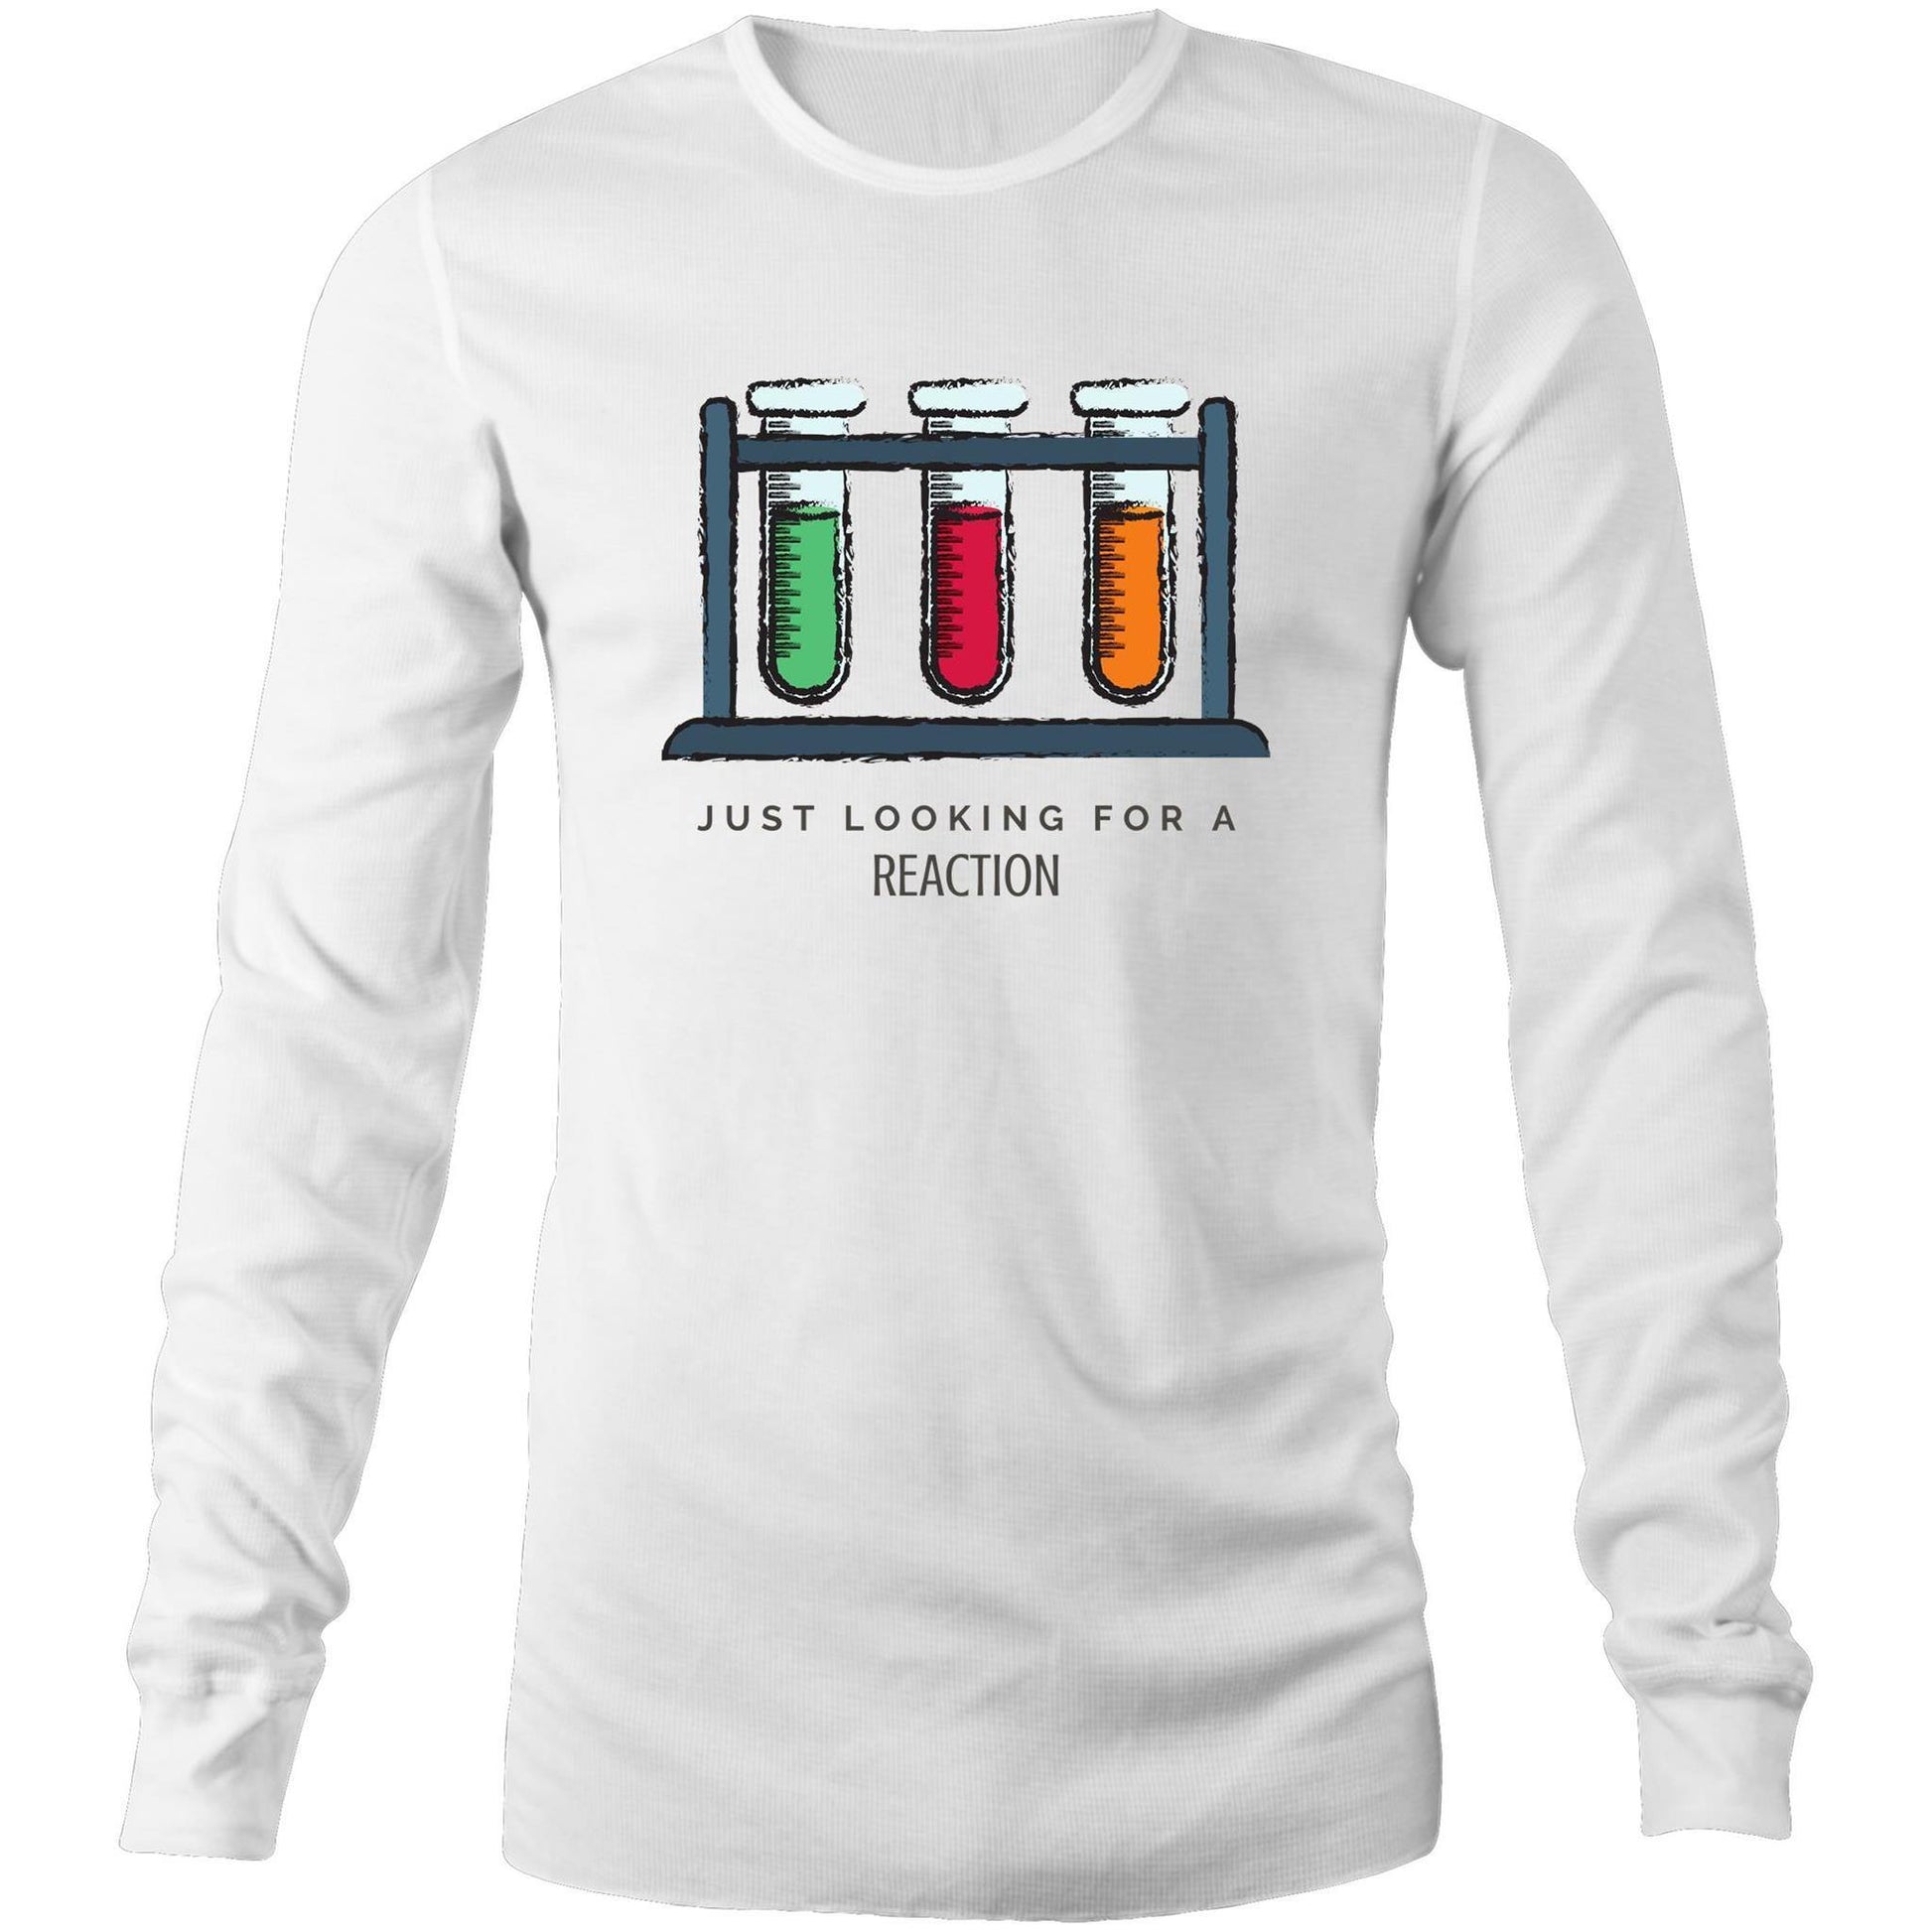 Just Looking For A Reaction - Long Sleeve T-Shirt White Unisex Long Sleeve T-shirt Mens Science Womens